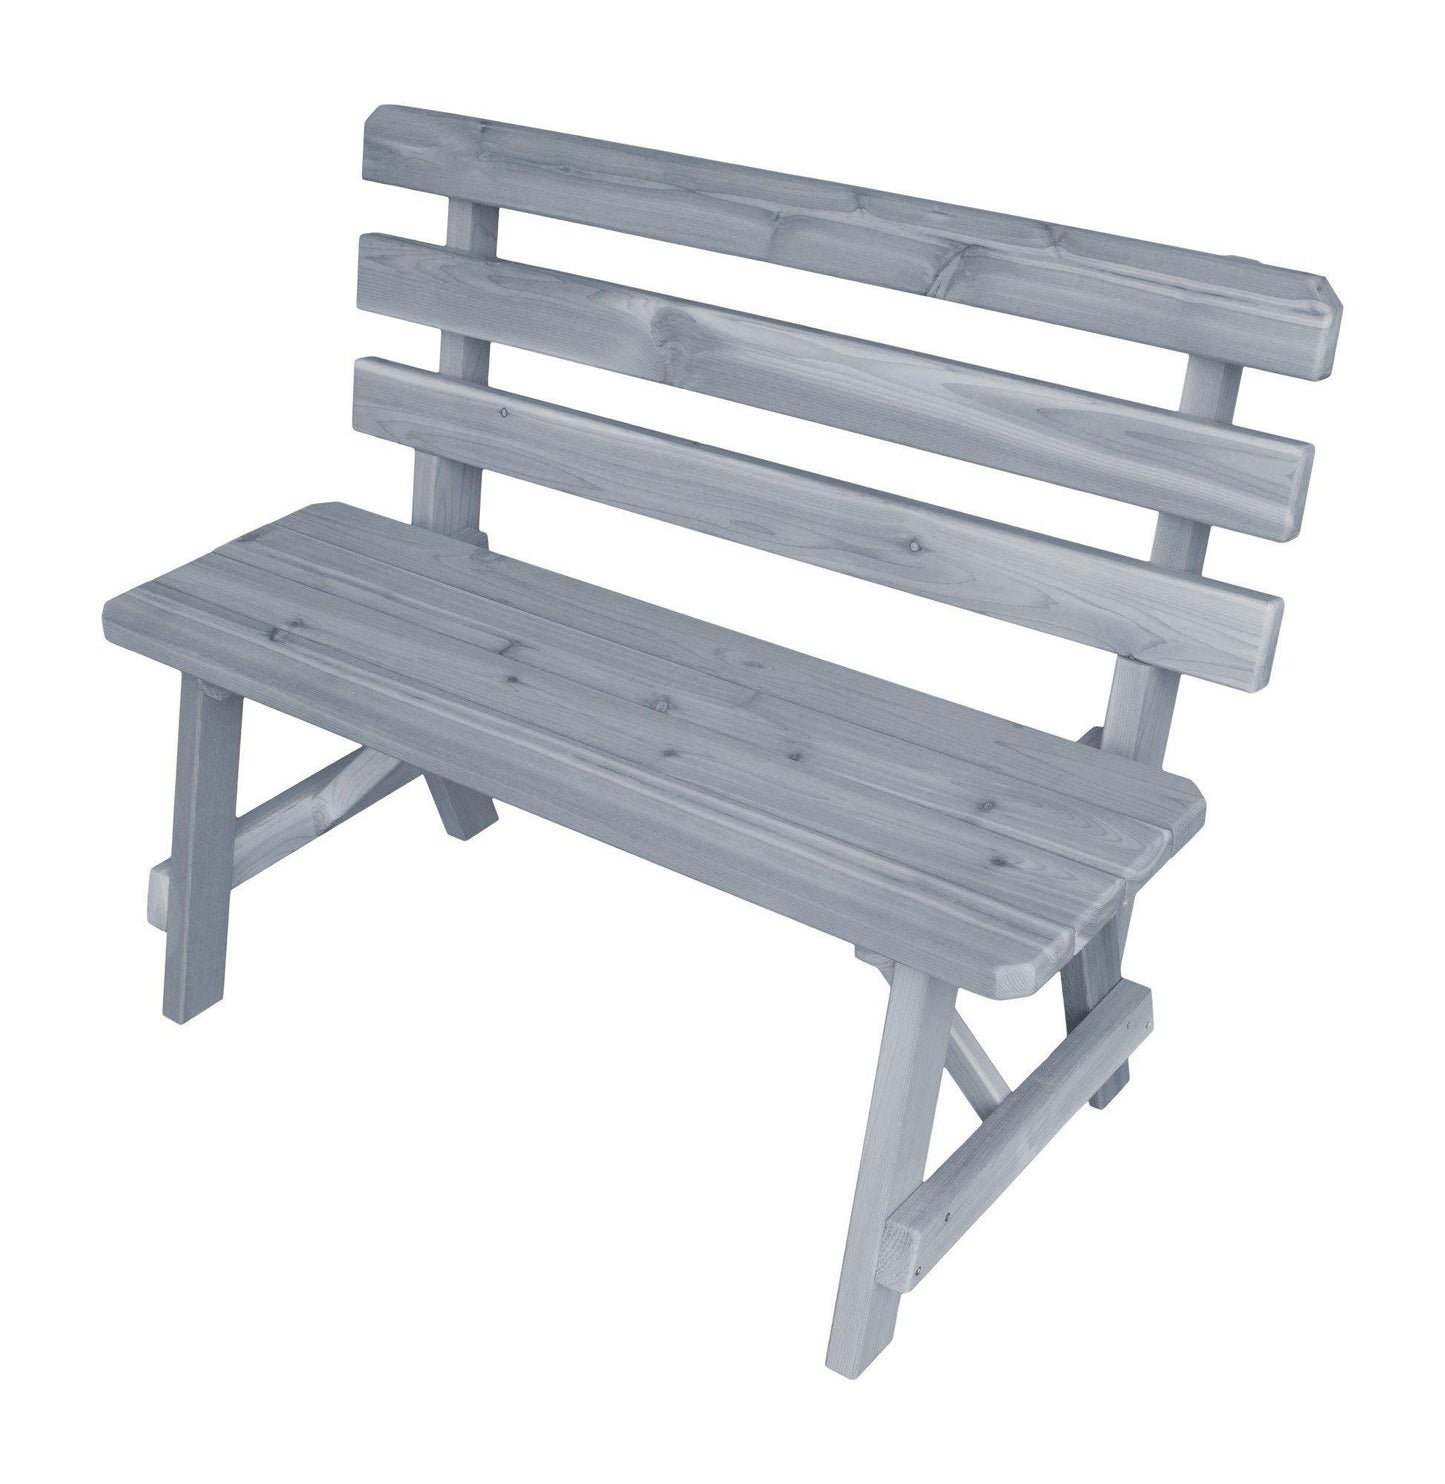 A&L FURNITURE CO. Western Red Cedar 33" Traditional Backed Bench Only - LEAD TIME TO SHIP 2 WEEKS